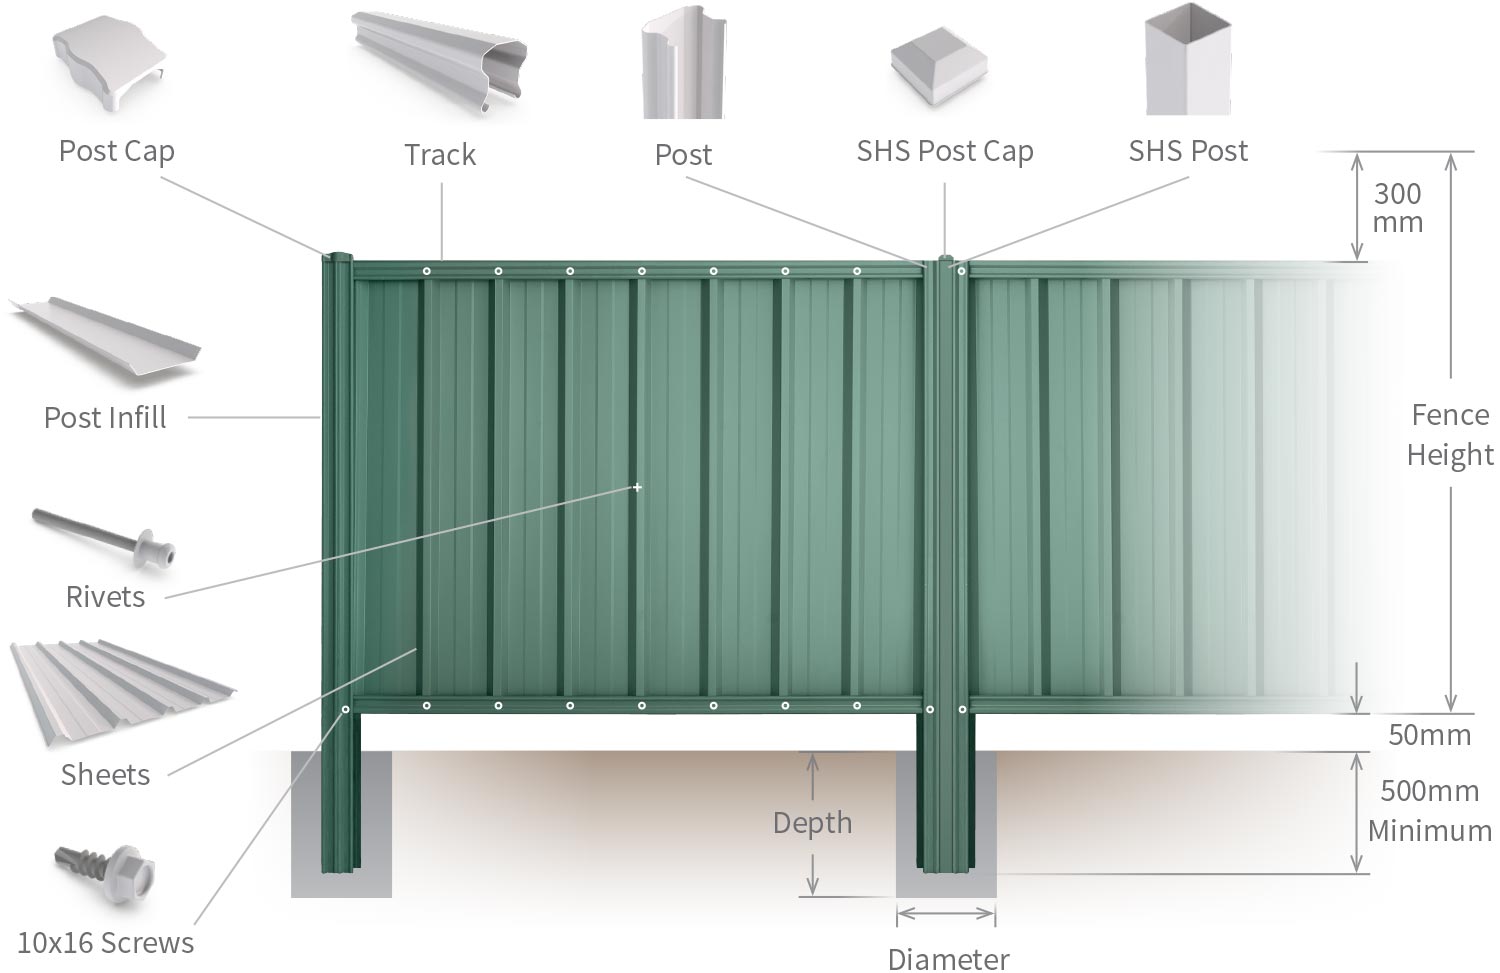 Fencing Fences Fence Cyclonic Profile Accessories